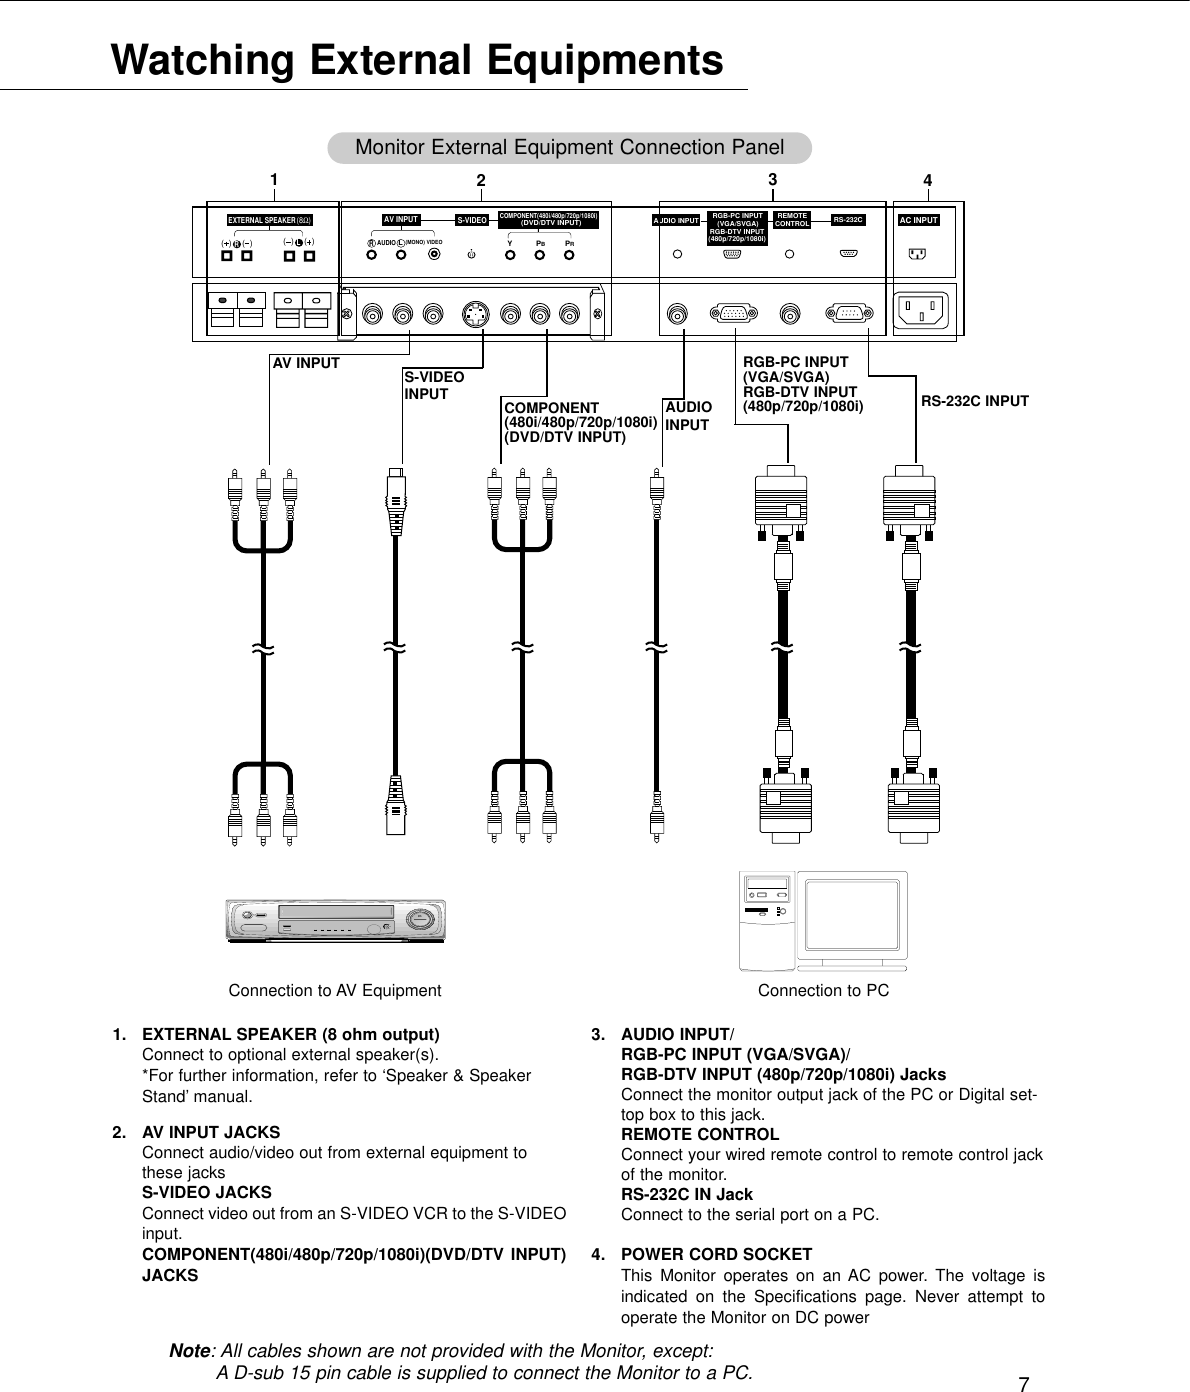 Connection to PCConnection to AV Equipment7AC INPUTAV INPUTYPBPR(8Ω)EXTERNAL SPEAKER(  )(  )R(MONO) VIDEORAUDIOLCOMPONENT(480i/480p/720p/1080i)(DVD/DTV INPUT)RS-232CRGB-PC INPUTAUDIO INPUT(VGA/SVGA)RGB-DTV INPUT(480p/720p/1080i)REMOTECONTROLS-VIDEO(  )(  )LAV INPUTCOMPONENT(480i/480p/720p/1080i)(DVD/DTV INPUT)S-VIDEOINPUT AUDIOINPUTRGB-PC INPUT(VGA/SVGA)RGB-DTV INPUT(480p/720p/1080i) RS-232C INPUTWatching External Equipments1. EXTERNAL SPEAKER (8 ohm output)Connect to optional external speaker(s).*For further information, refer to ‘Speaker &amp; SpeakerStand’manual.2. AV INPUT JACKSConnect audio/video out from external equipment tothese jacksS-VIDEO JACKSConnect video out from an S-VIDEO VCR to the S-VIDEOinput.COMPONENT(480i/480p/720p/1080i)(DVD/DTV INPUT)JACKS3. AUDIO INPUT/ RGB-PC INPUT (VGA/SVGA)/ RGB-DTV INPUT (480p/720p/1080i) JacksConnect the monitor output jack of the PC or Digital set-top box to this jack.REMOTE CONTROLConnect your wired remote control to remote control jackof the monitor.RS-232C IN JackConnect to the serial port on a PC.4. POWER CORD SOCKETThis Monitor operates on an AC power. The voltage isindicated on the Specifications page. Never attempt tooperate the Monitor on DC power4321Note: All cables shown are not provided with the Monitor, except:A D-sub 15 pin cable is supplied to connect the Monitor to a PC.Monitor External Equipment Connection Panel